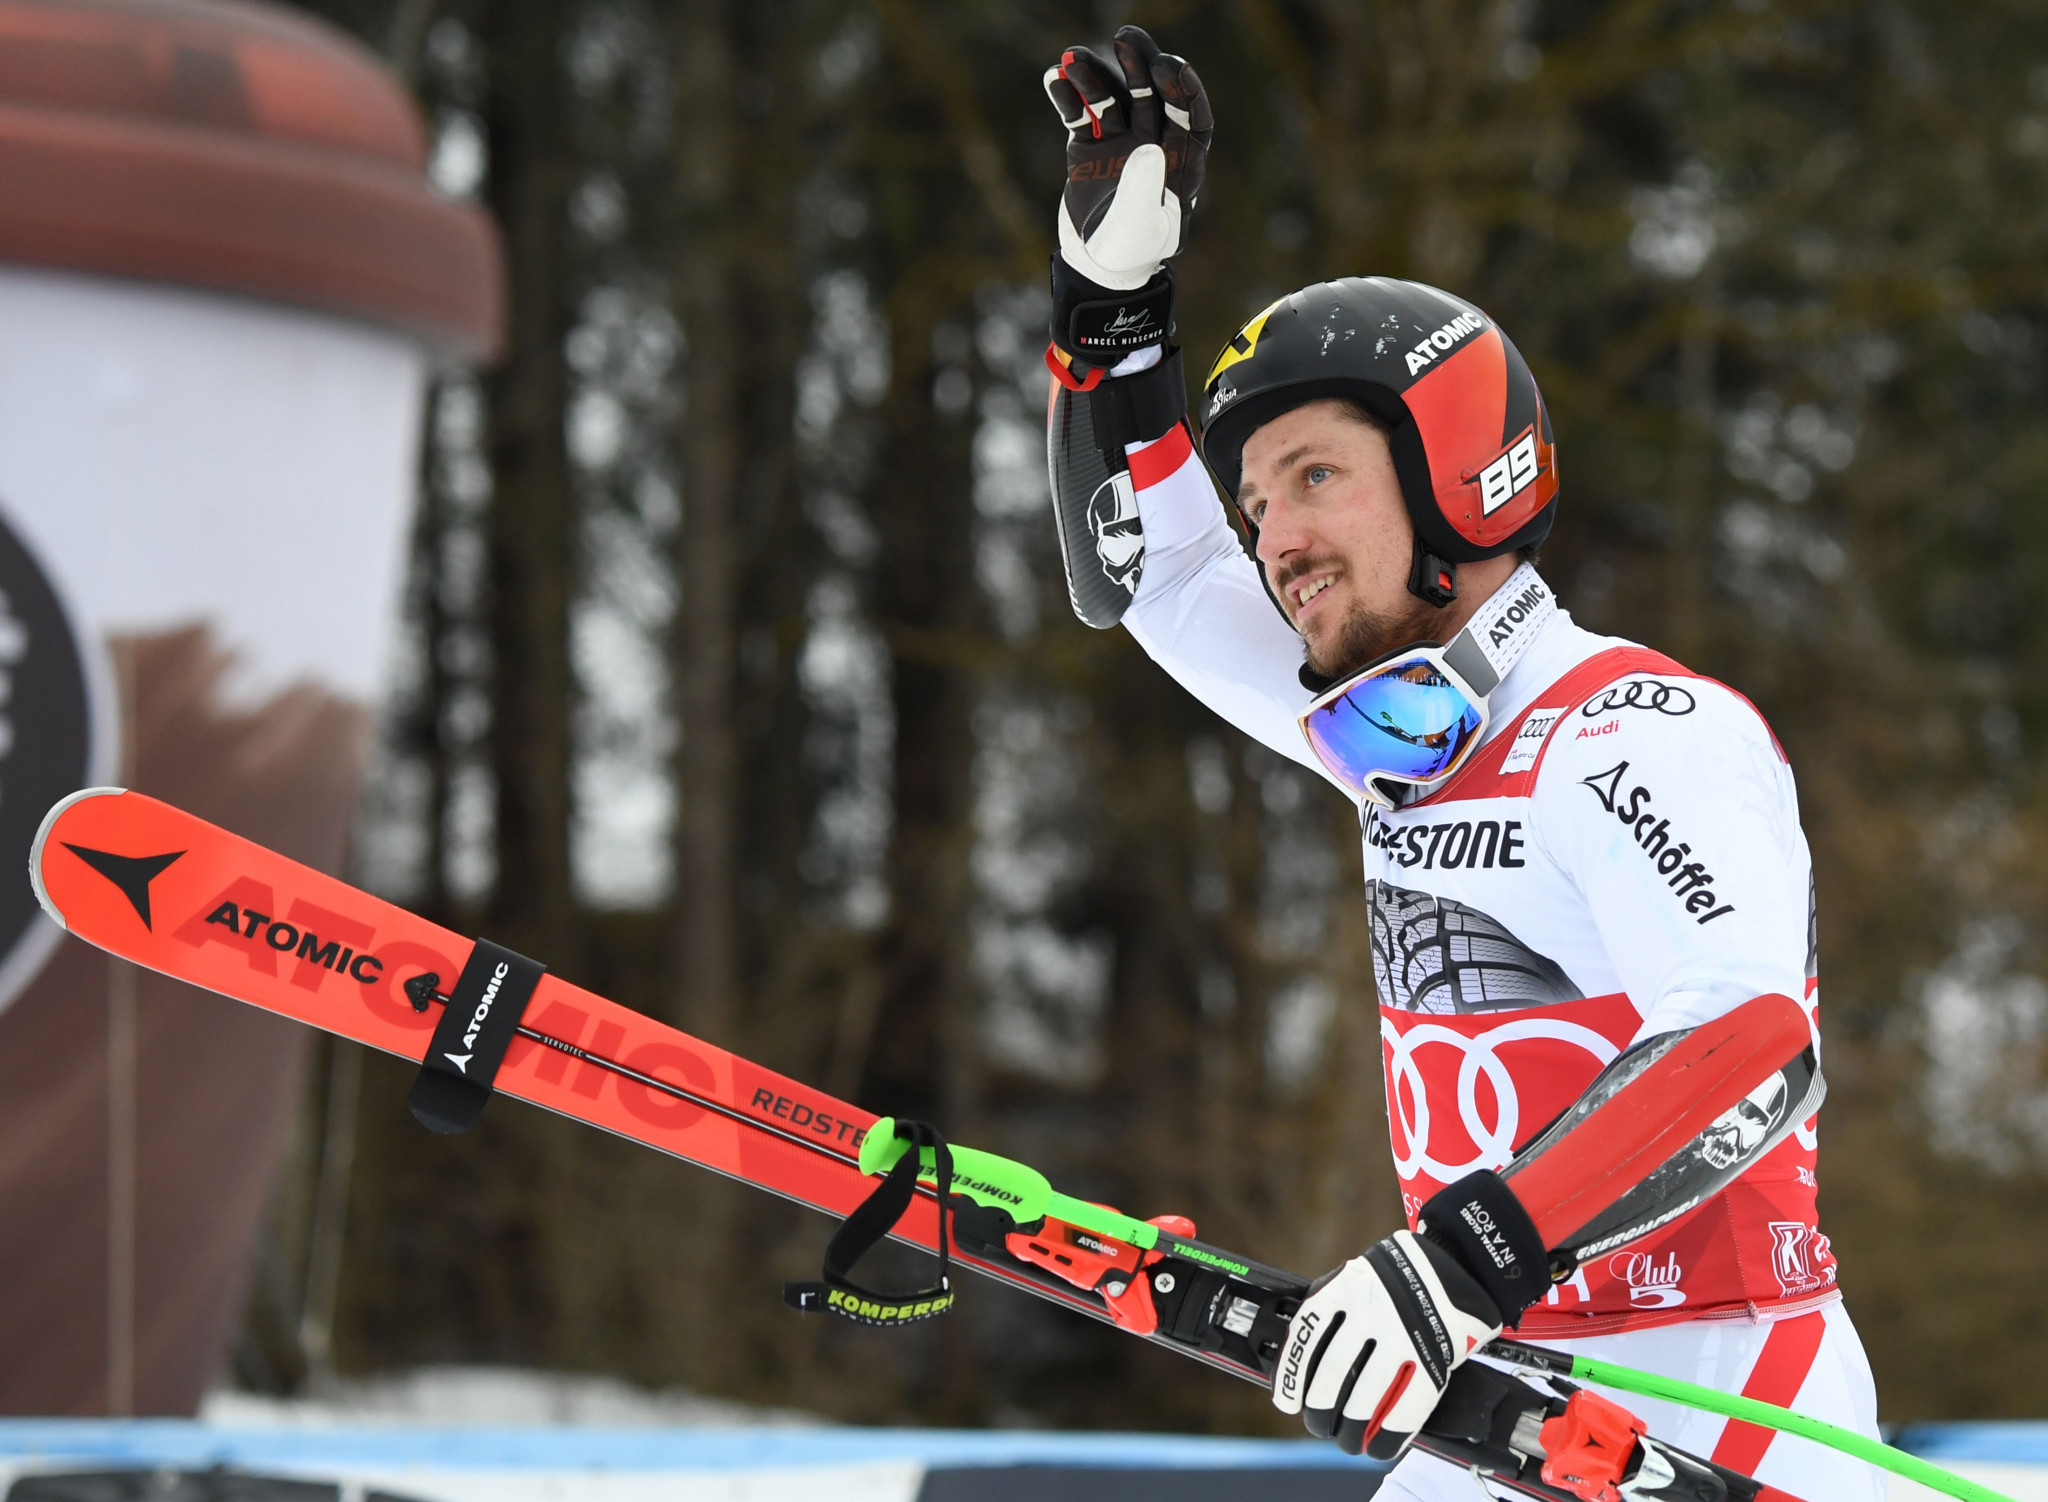 FIS Alpine World Cup season to continue with Stockholm city event